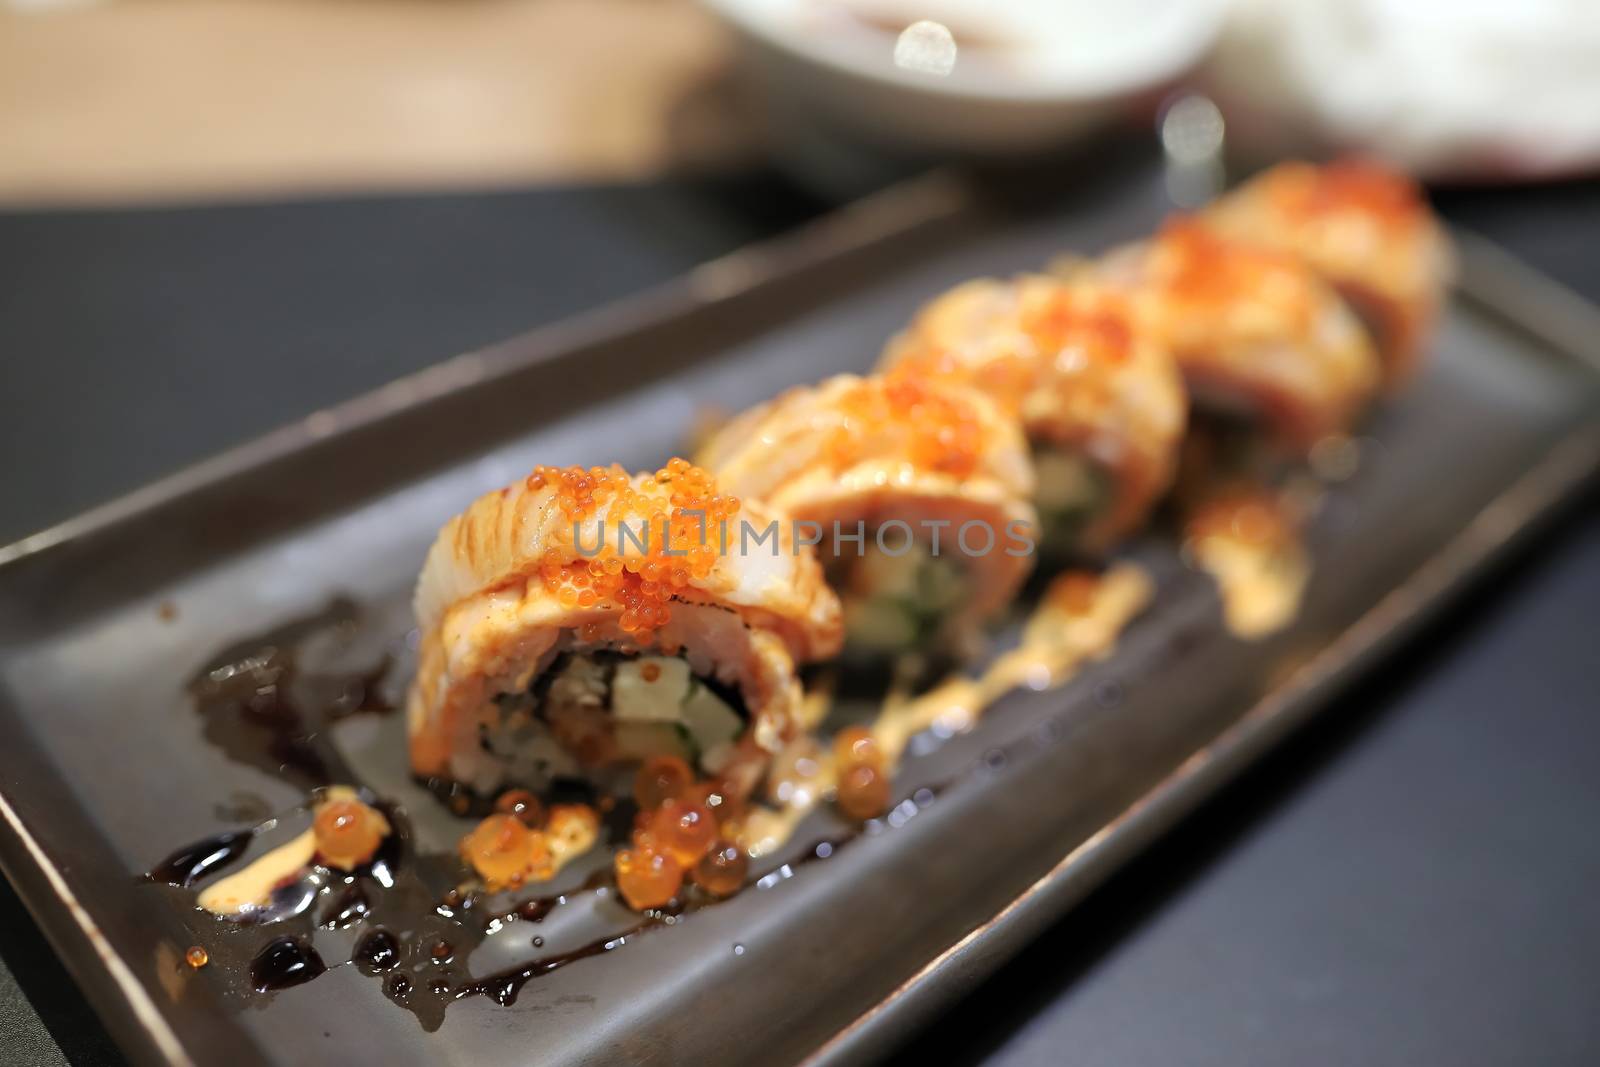 Engawa roll Topped with orange flying fish roe In a square plate In a japanese restaurant. Selective focus.